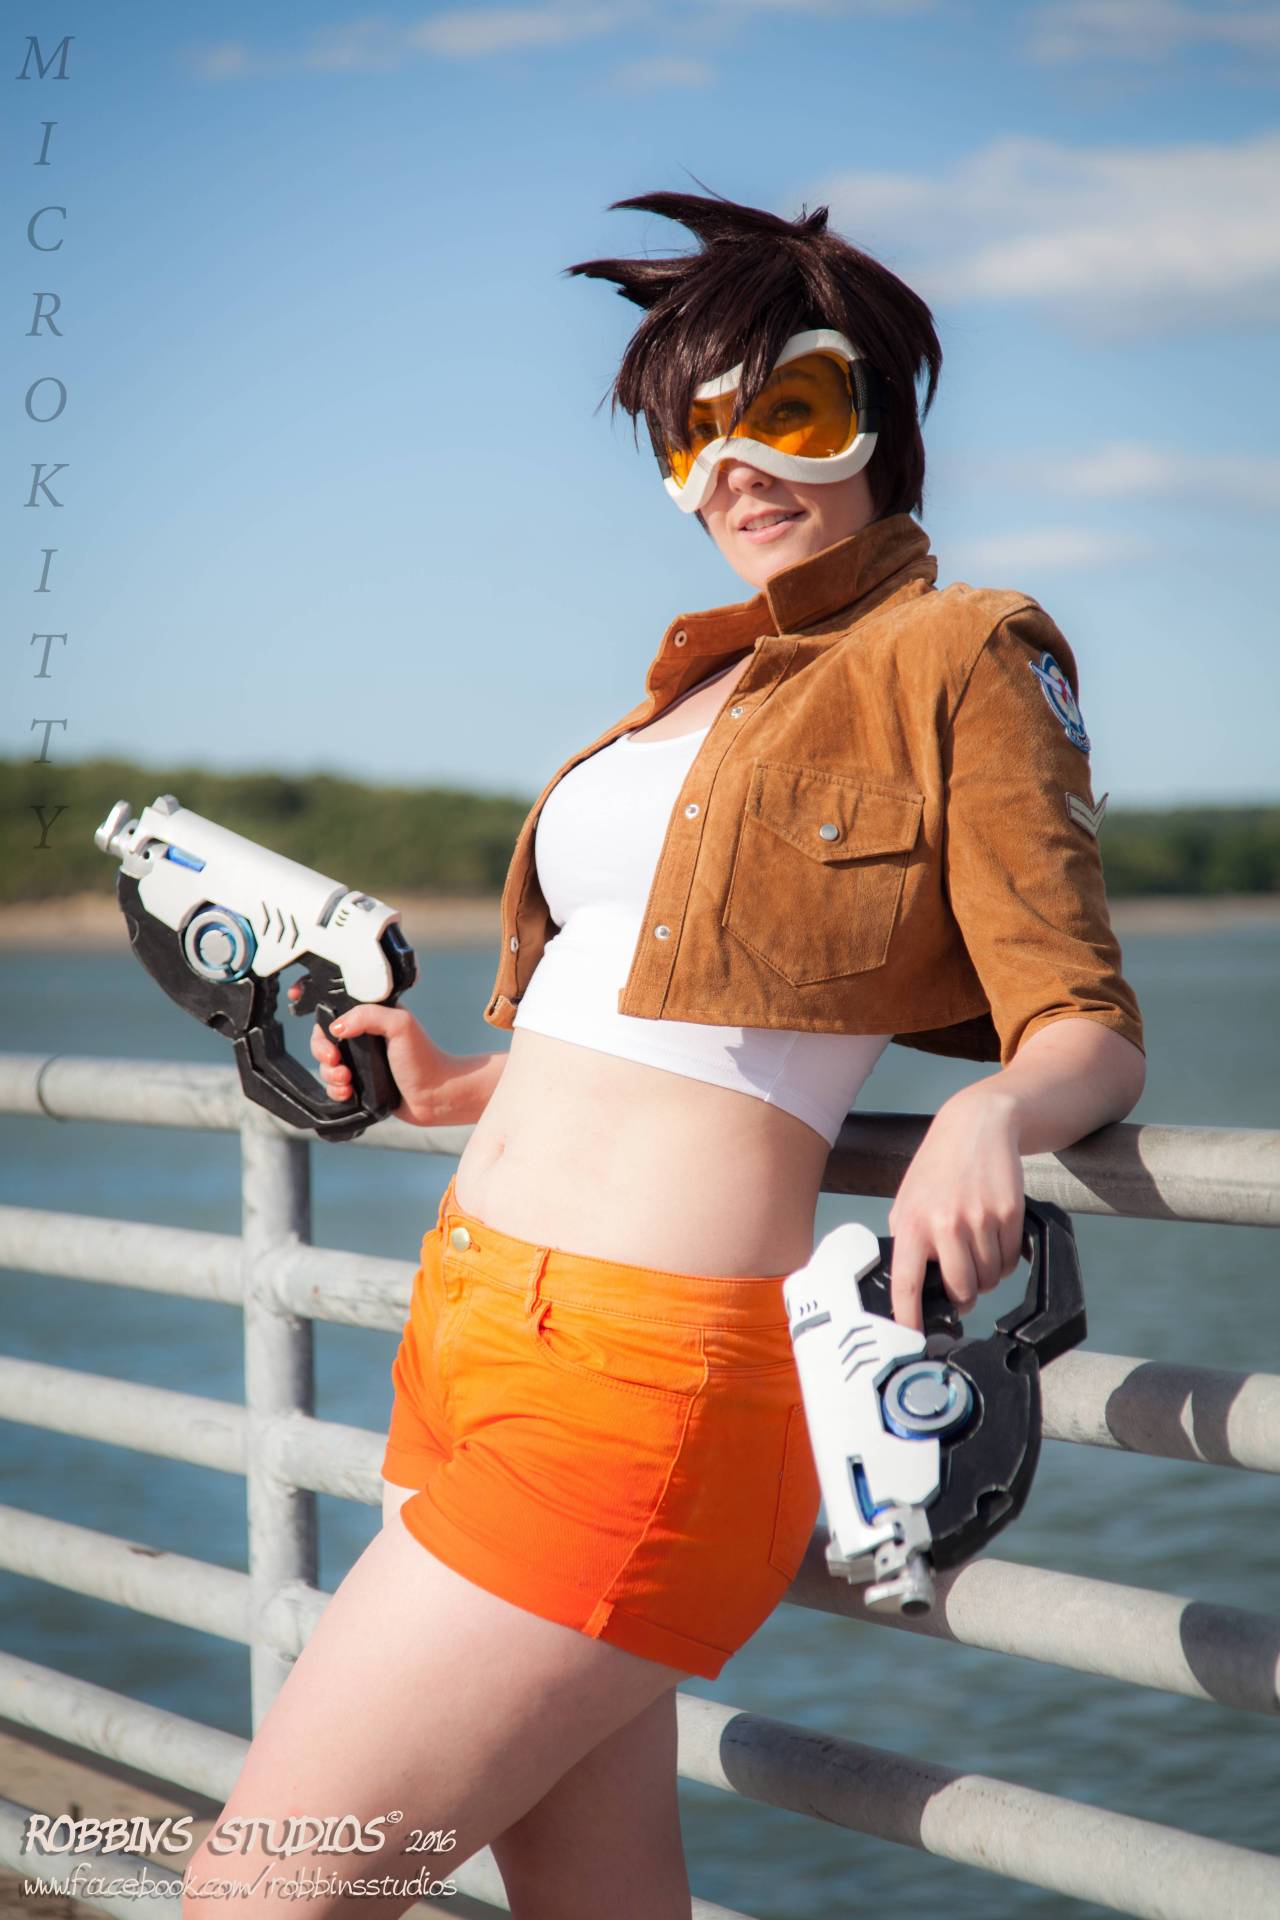 I asked reddit gets drawn to draw my Tracer costume! &lt;3check me out on facebook! 